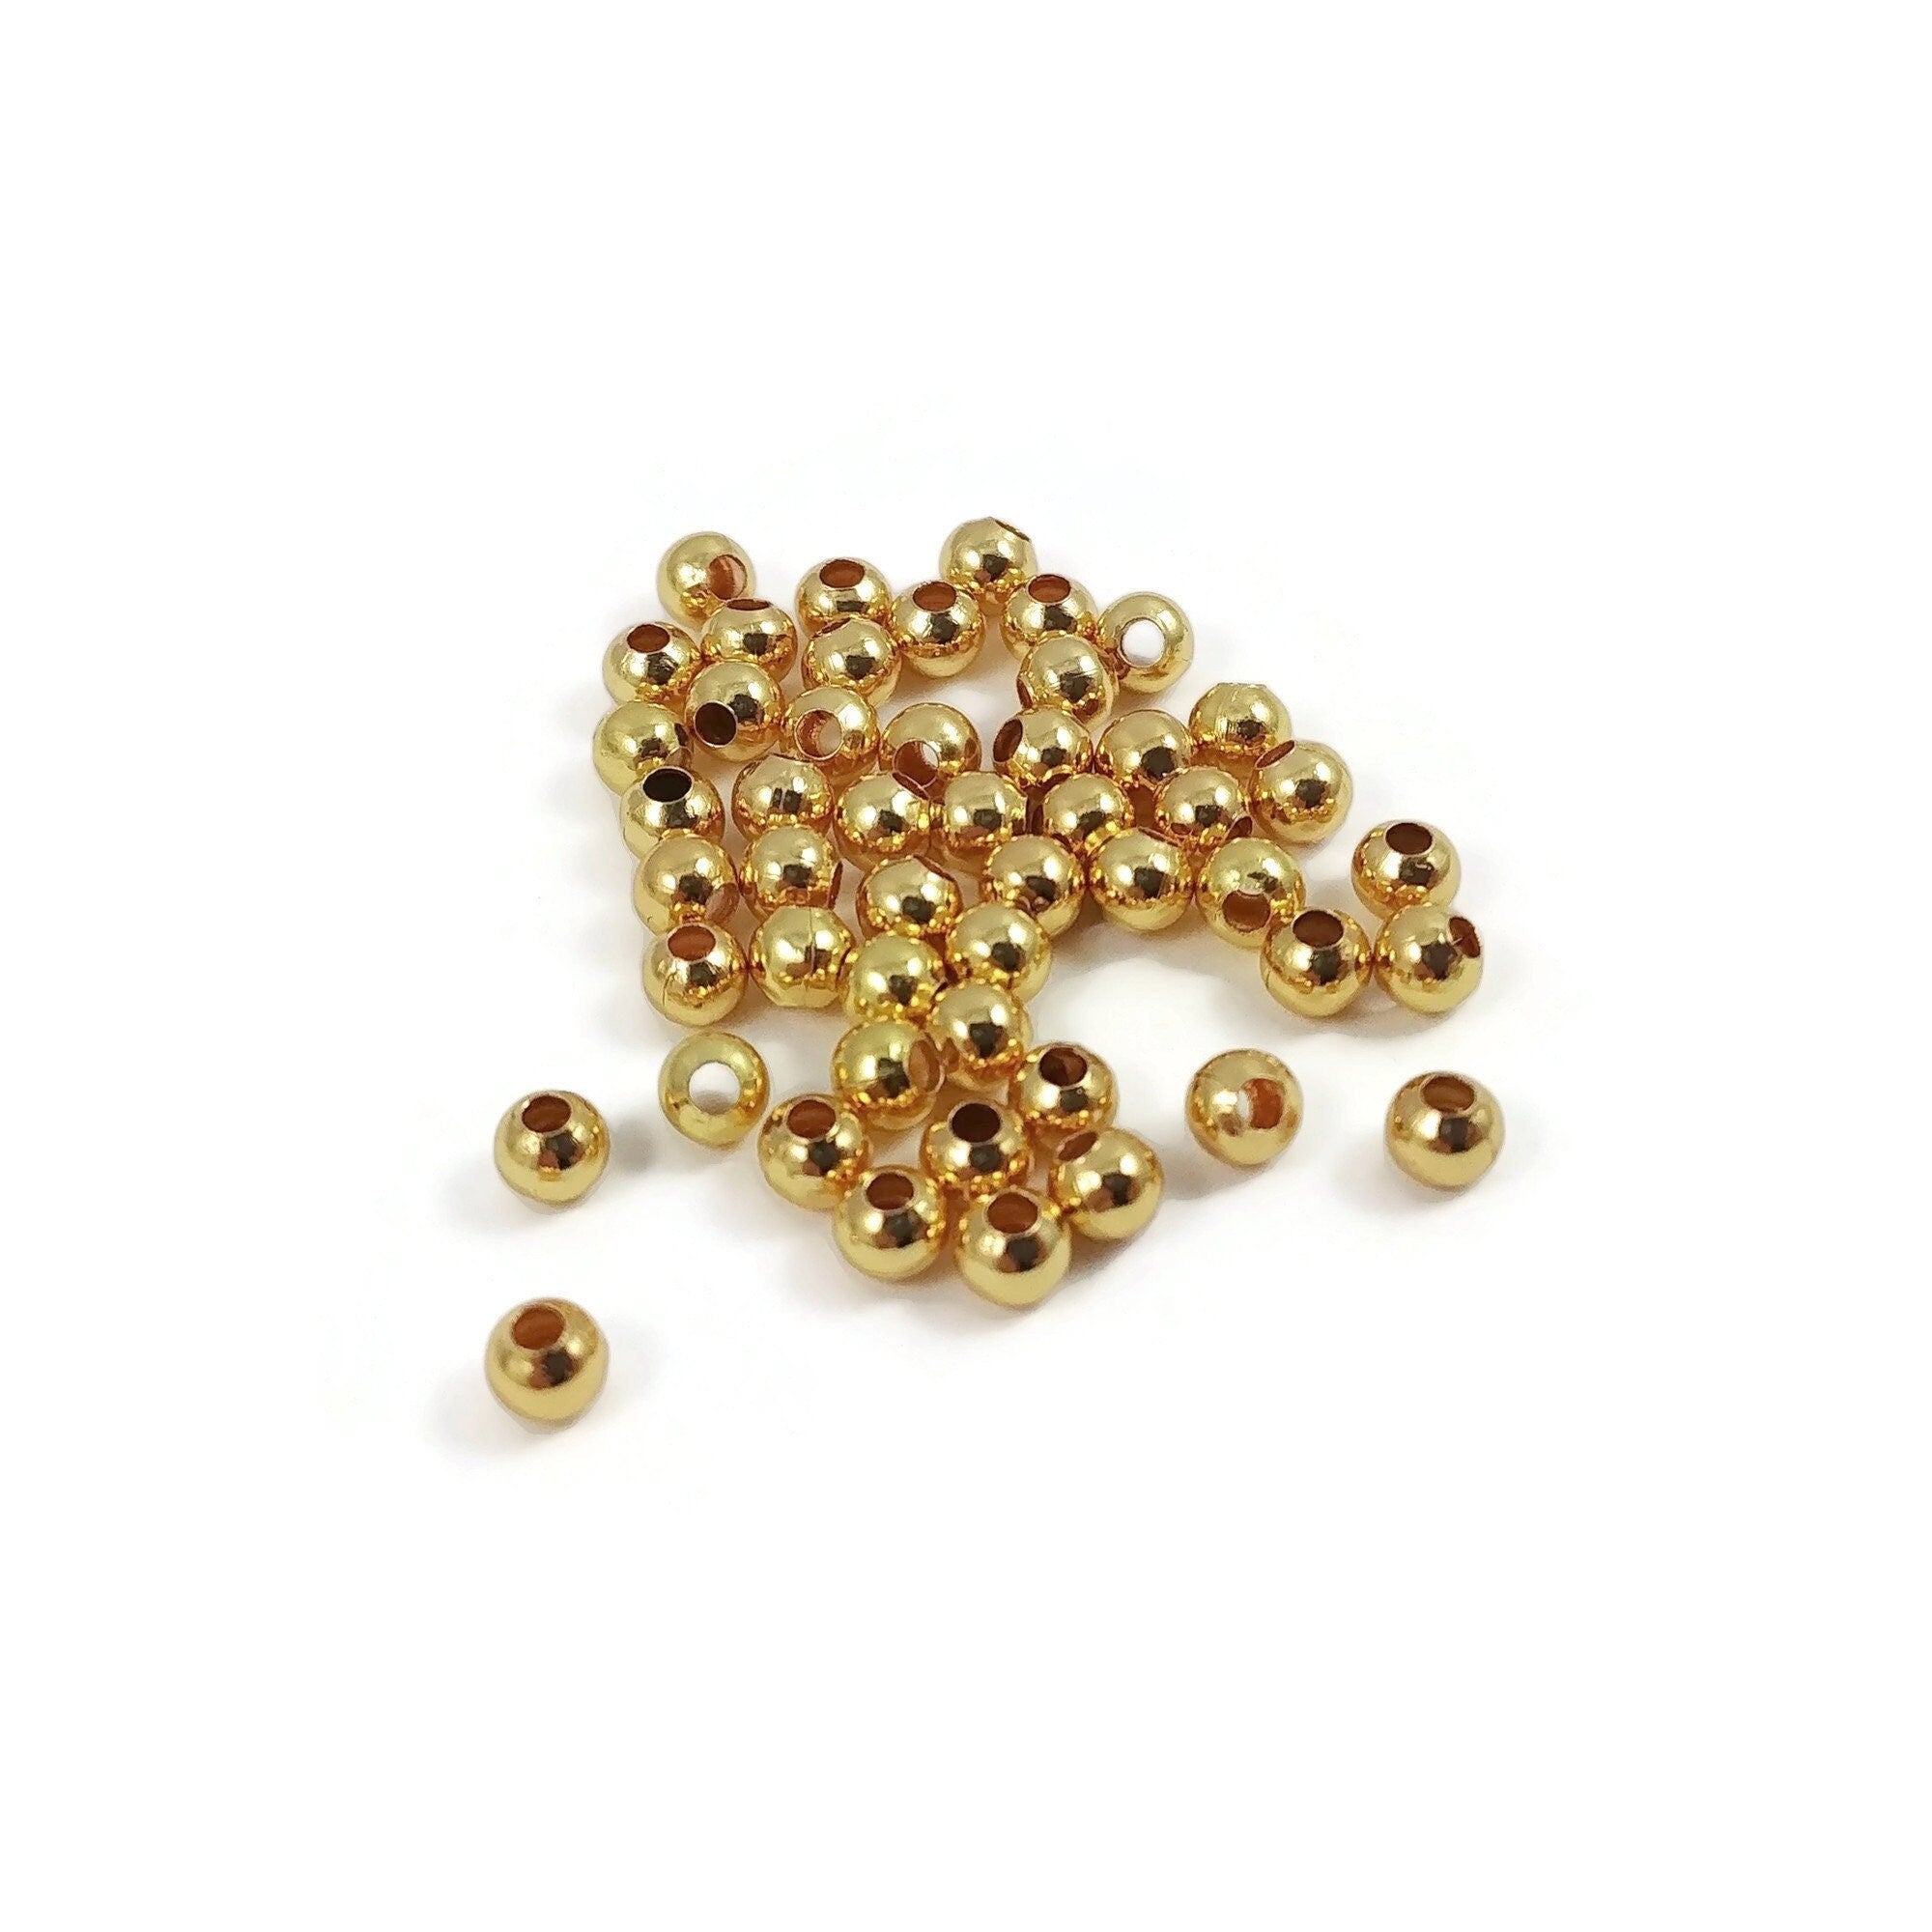 MAPOIEU 260pcs 18K Gold Filled Spacer Round Beads,Seamless Smooth Metal  Round Beads,Gold Plated Solid Brass Beads for DIY Bracelet Necklace Earring